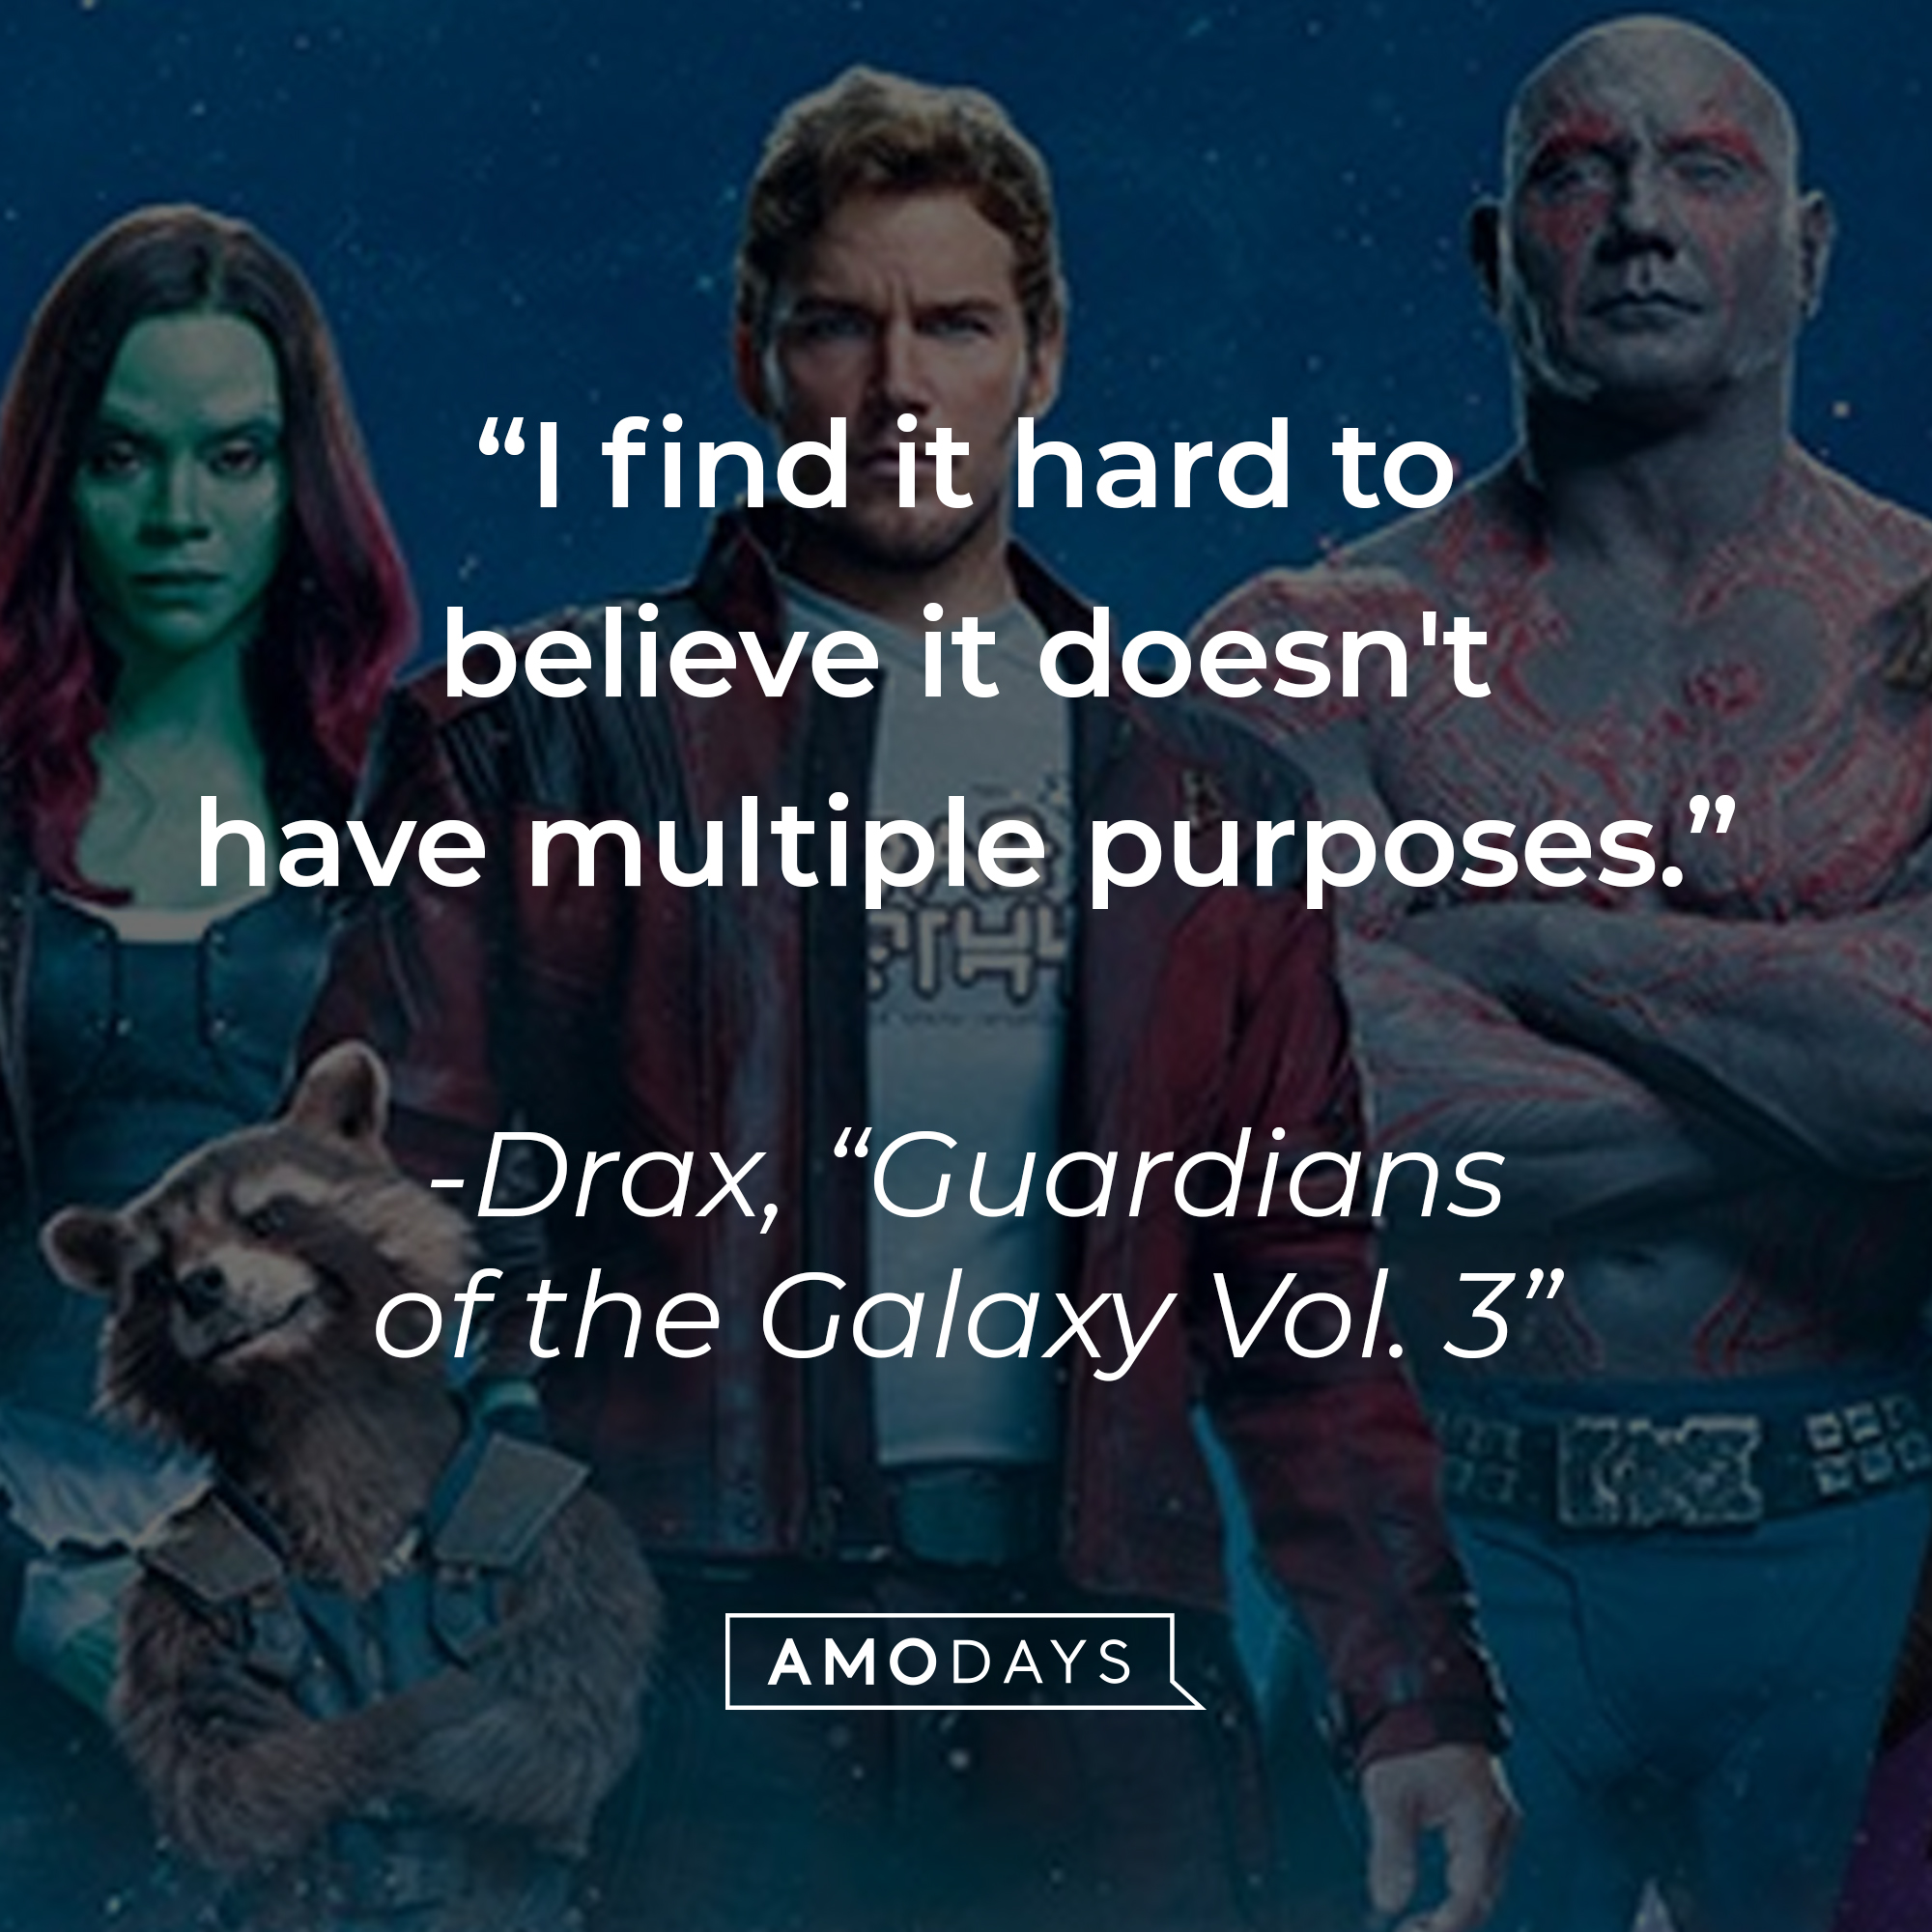 Drax with his quote: "I find it hard to believe it doesn't have multiple purposes." | Source: Facebook.com/guardiansofthegalaxy